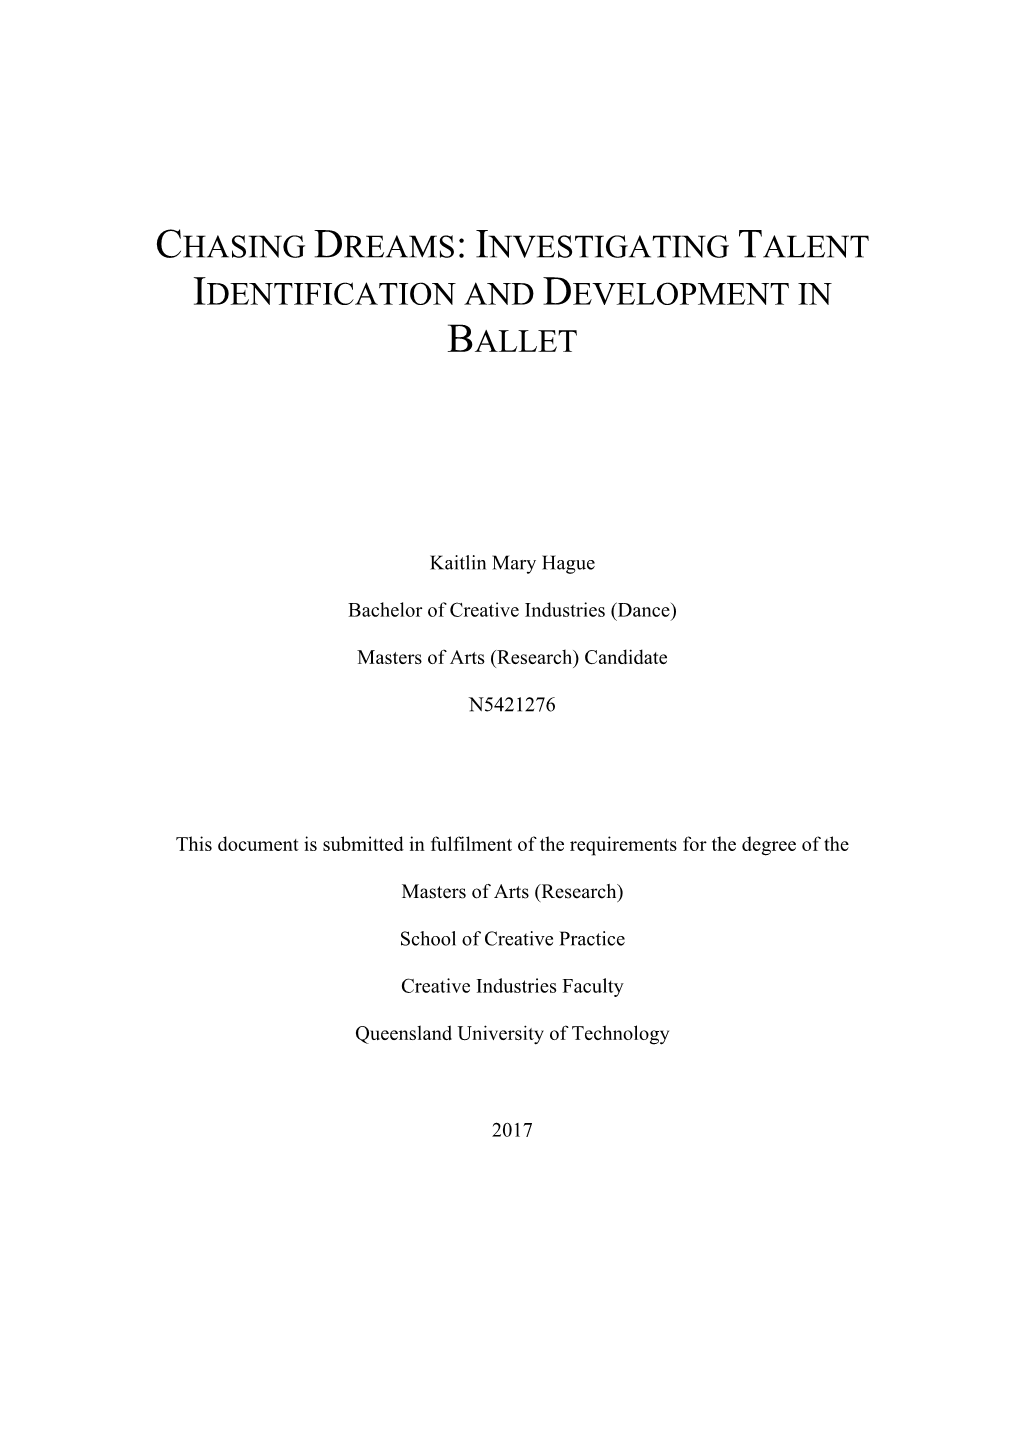 Investigating Talent Identification and Development in Ballet